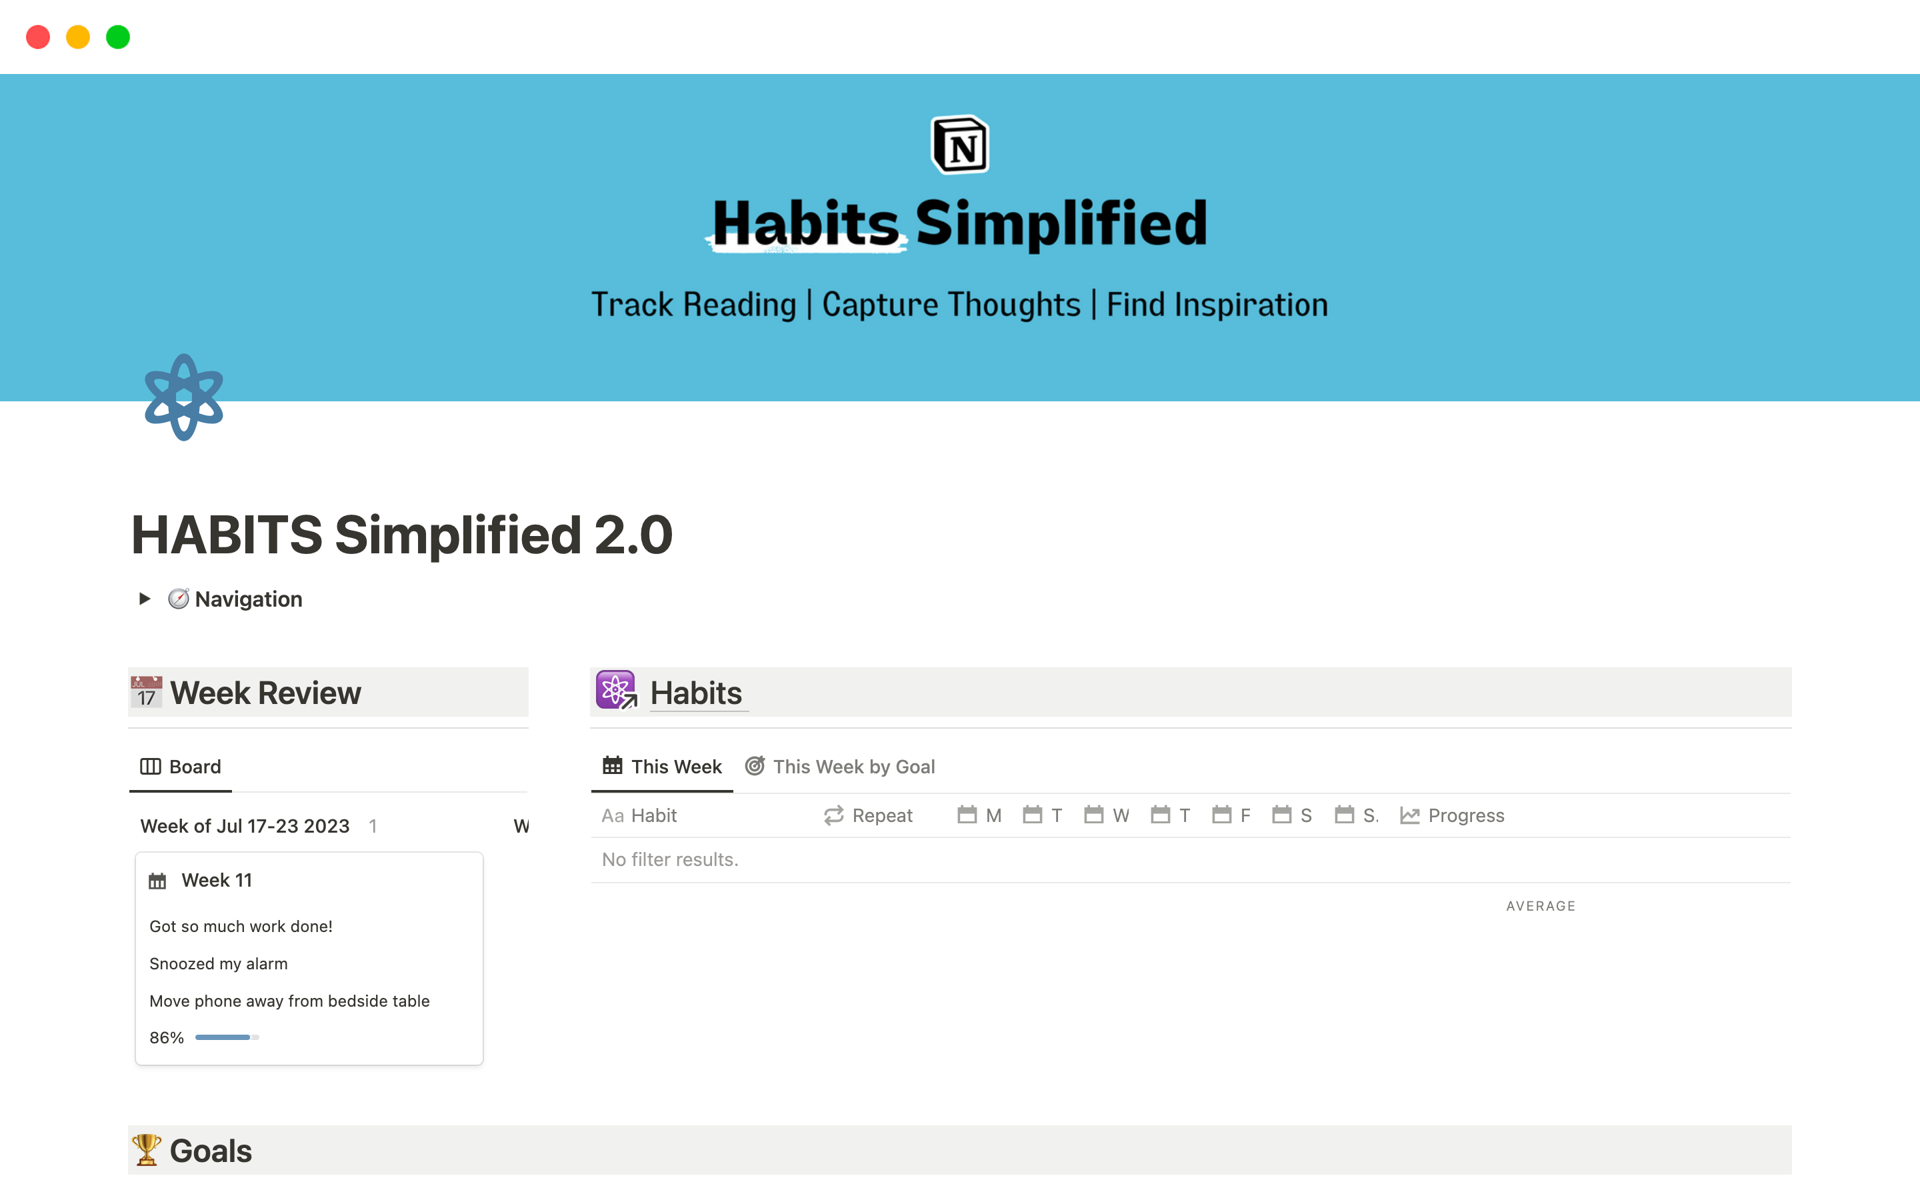 HABITS Simplified takes all of the features from your favourite habit tracking apps and places them in one template - designed for speed and mobile-use.